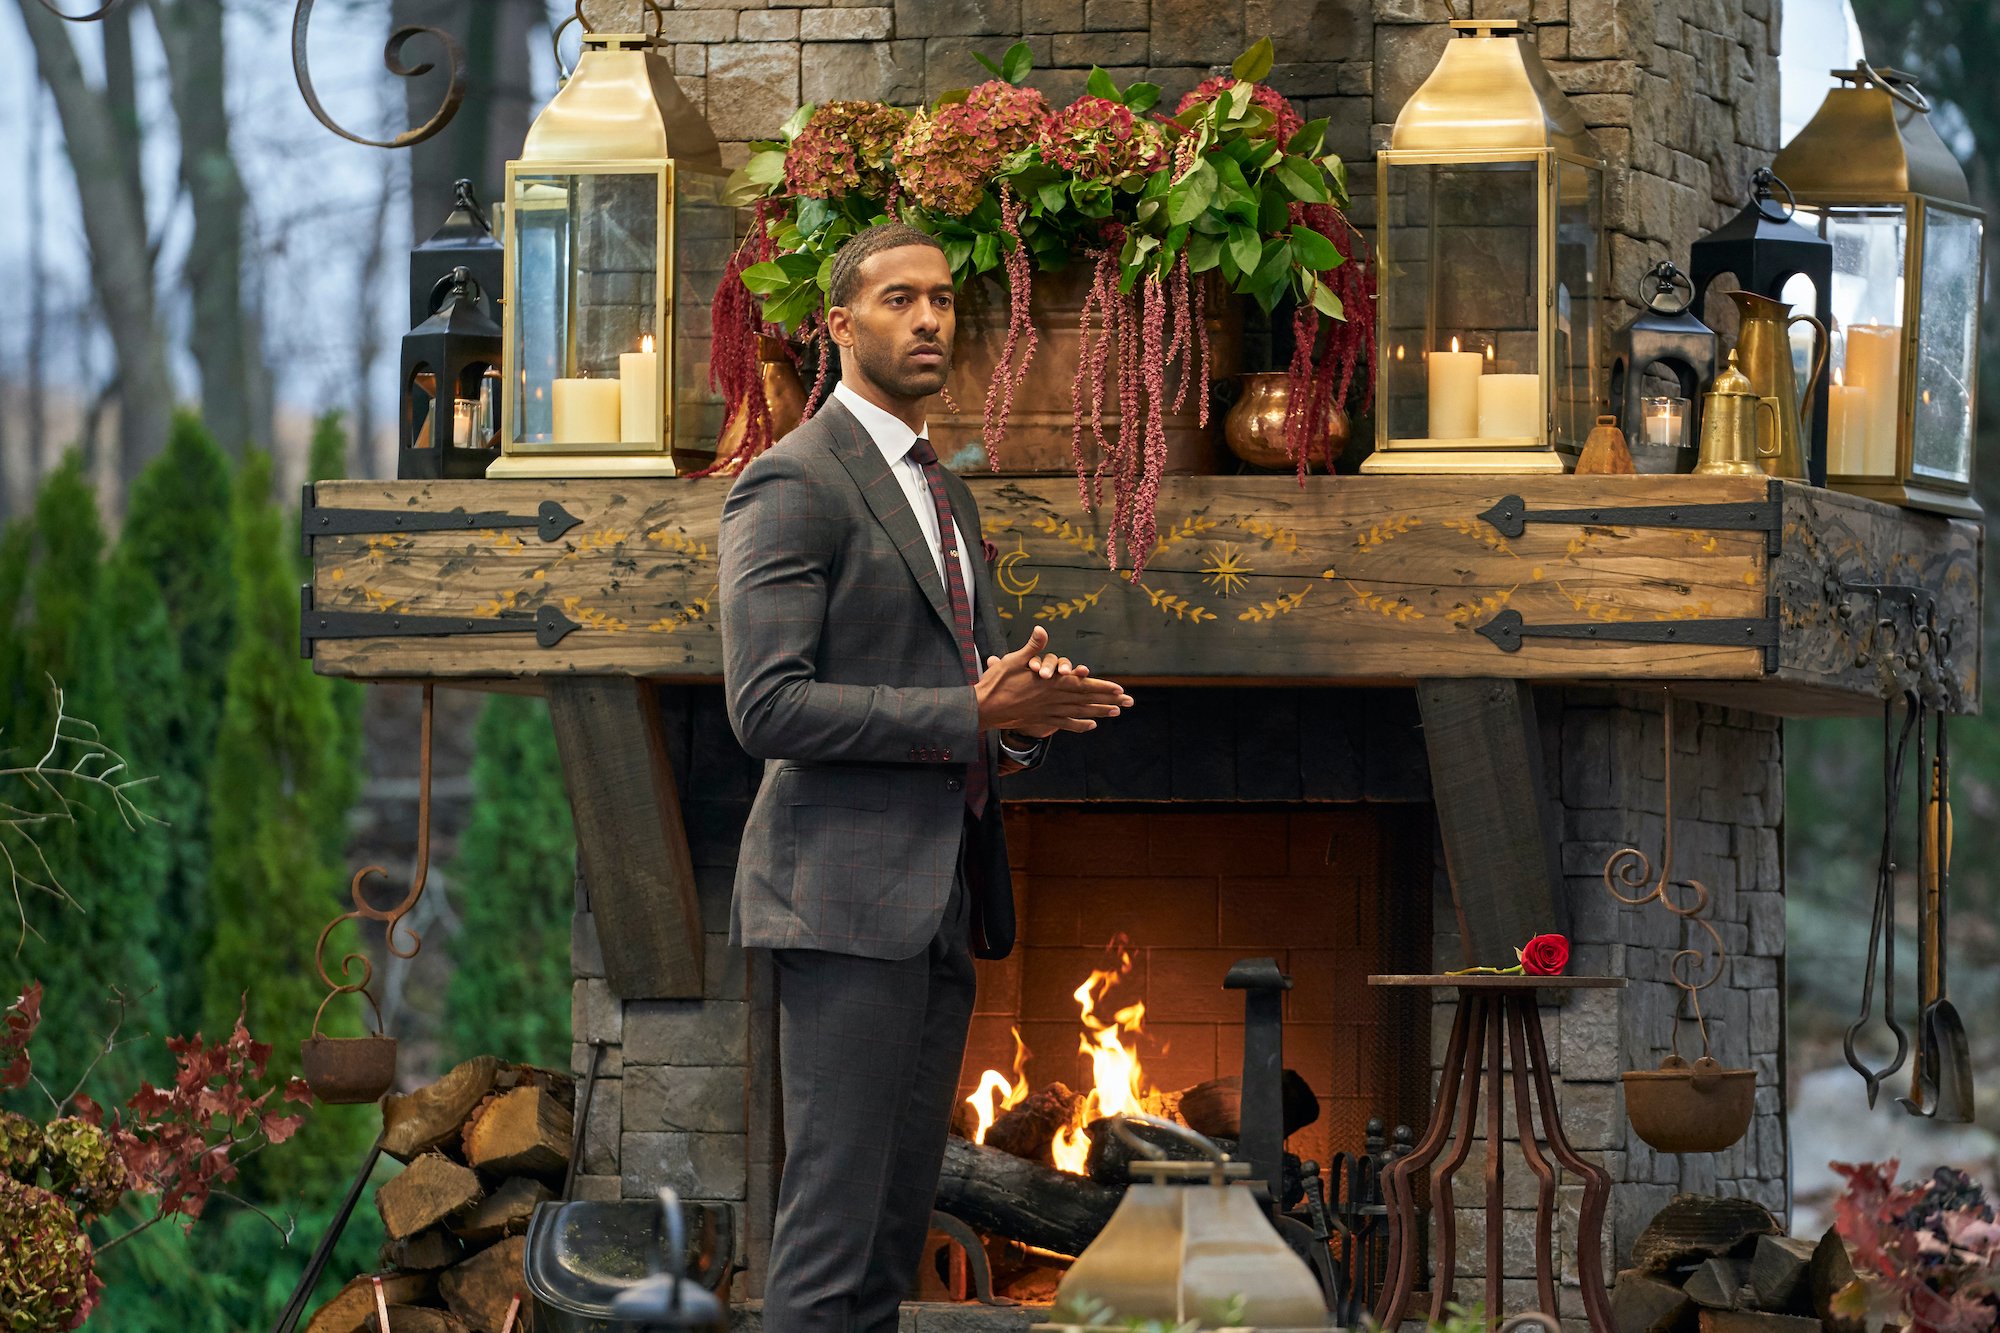 Best 'The Bachelor' episodes include Matt James, pictured, in front of an outdoor fireplace